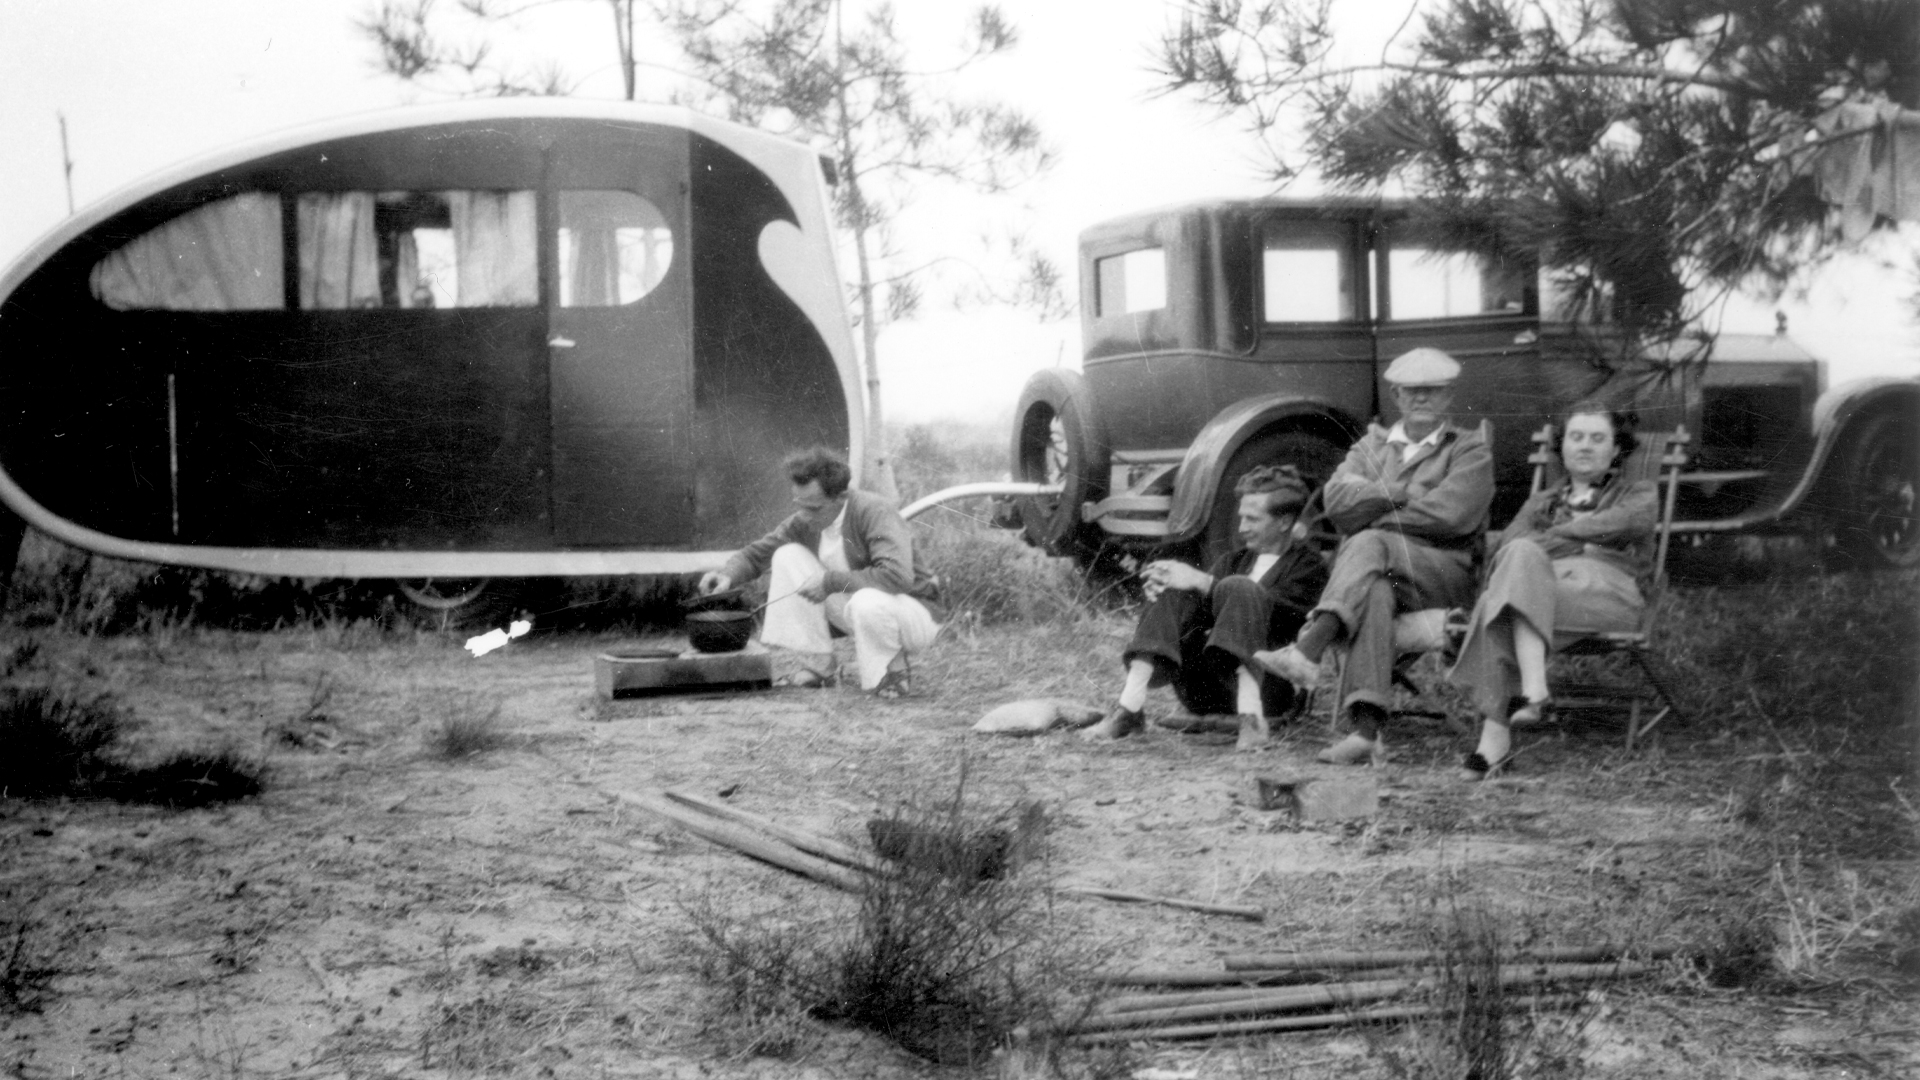 A vintage Airstream Torpedo travel trailer with people sitting outside of the trailer and car.